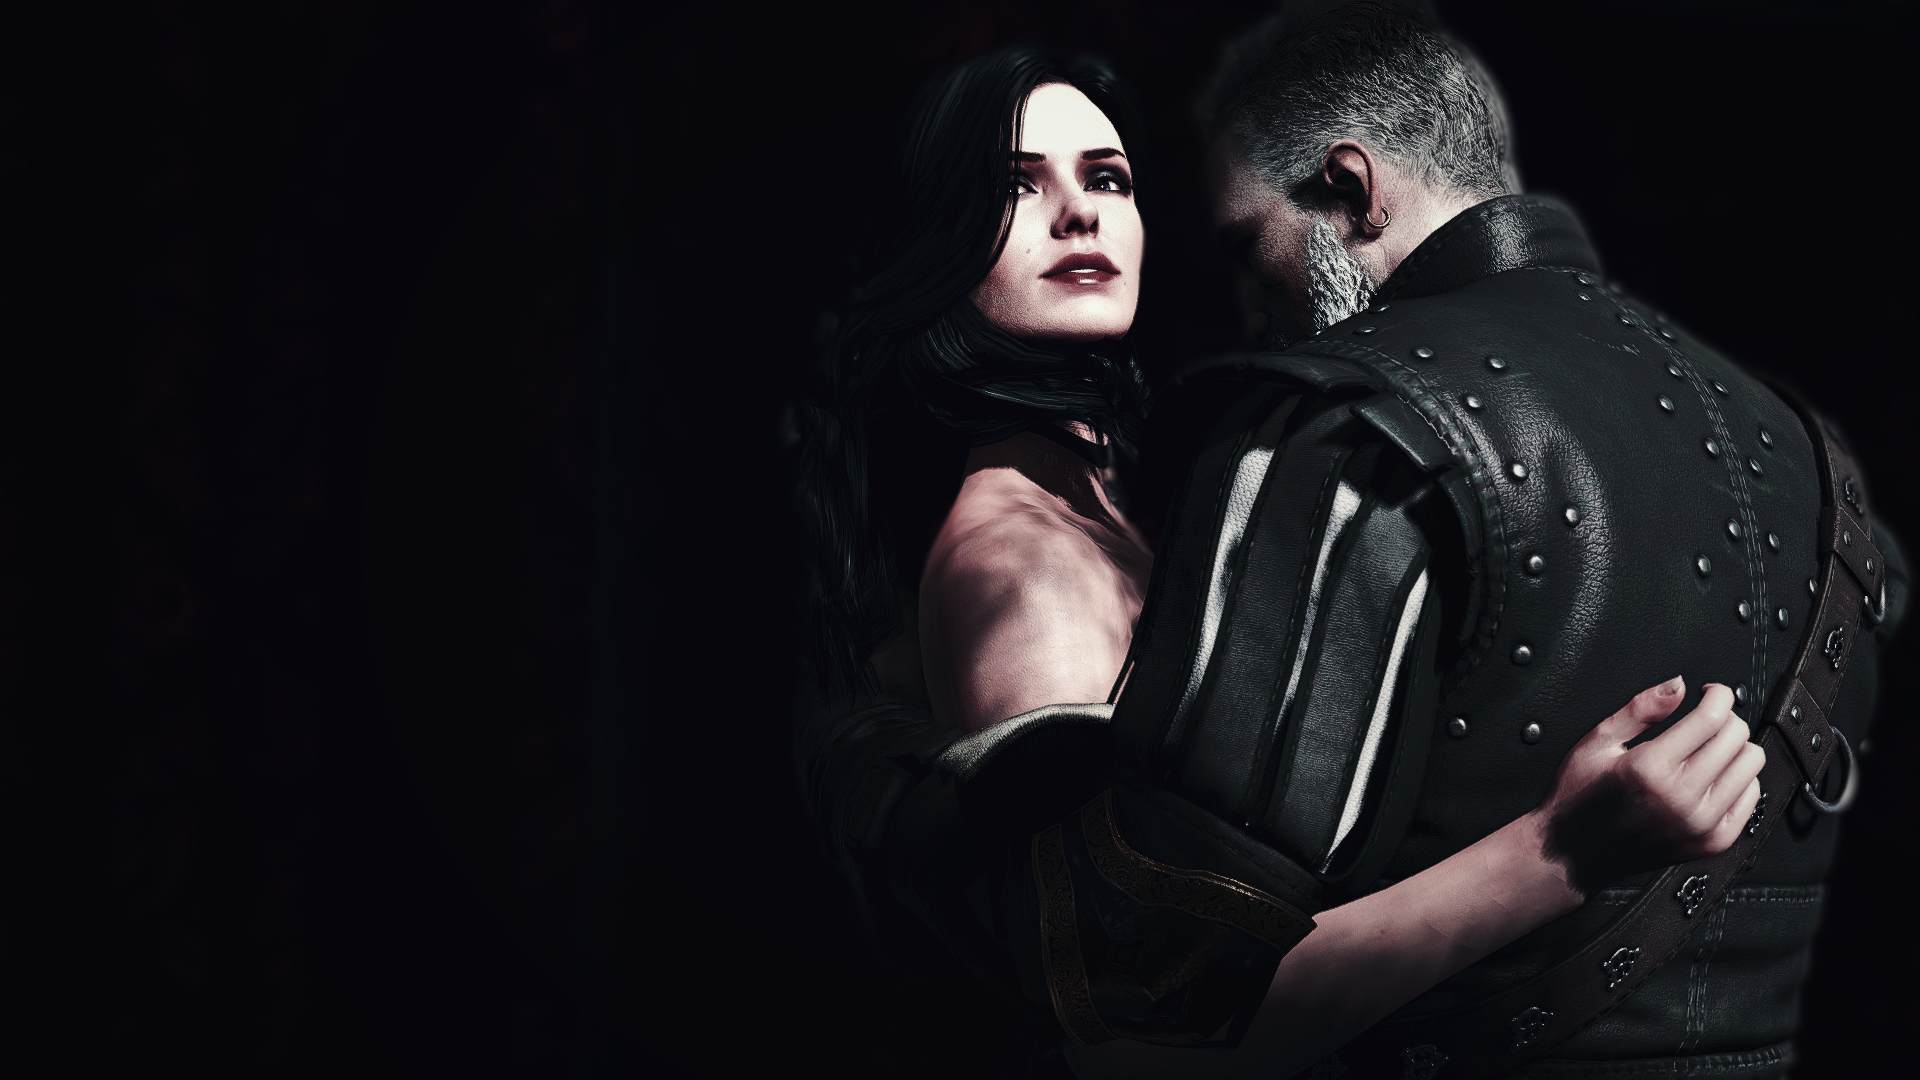 The Witcher The Witcher 3 Yennefer Of Vengerberg 1920x1080